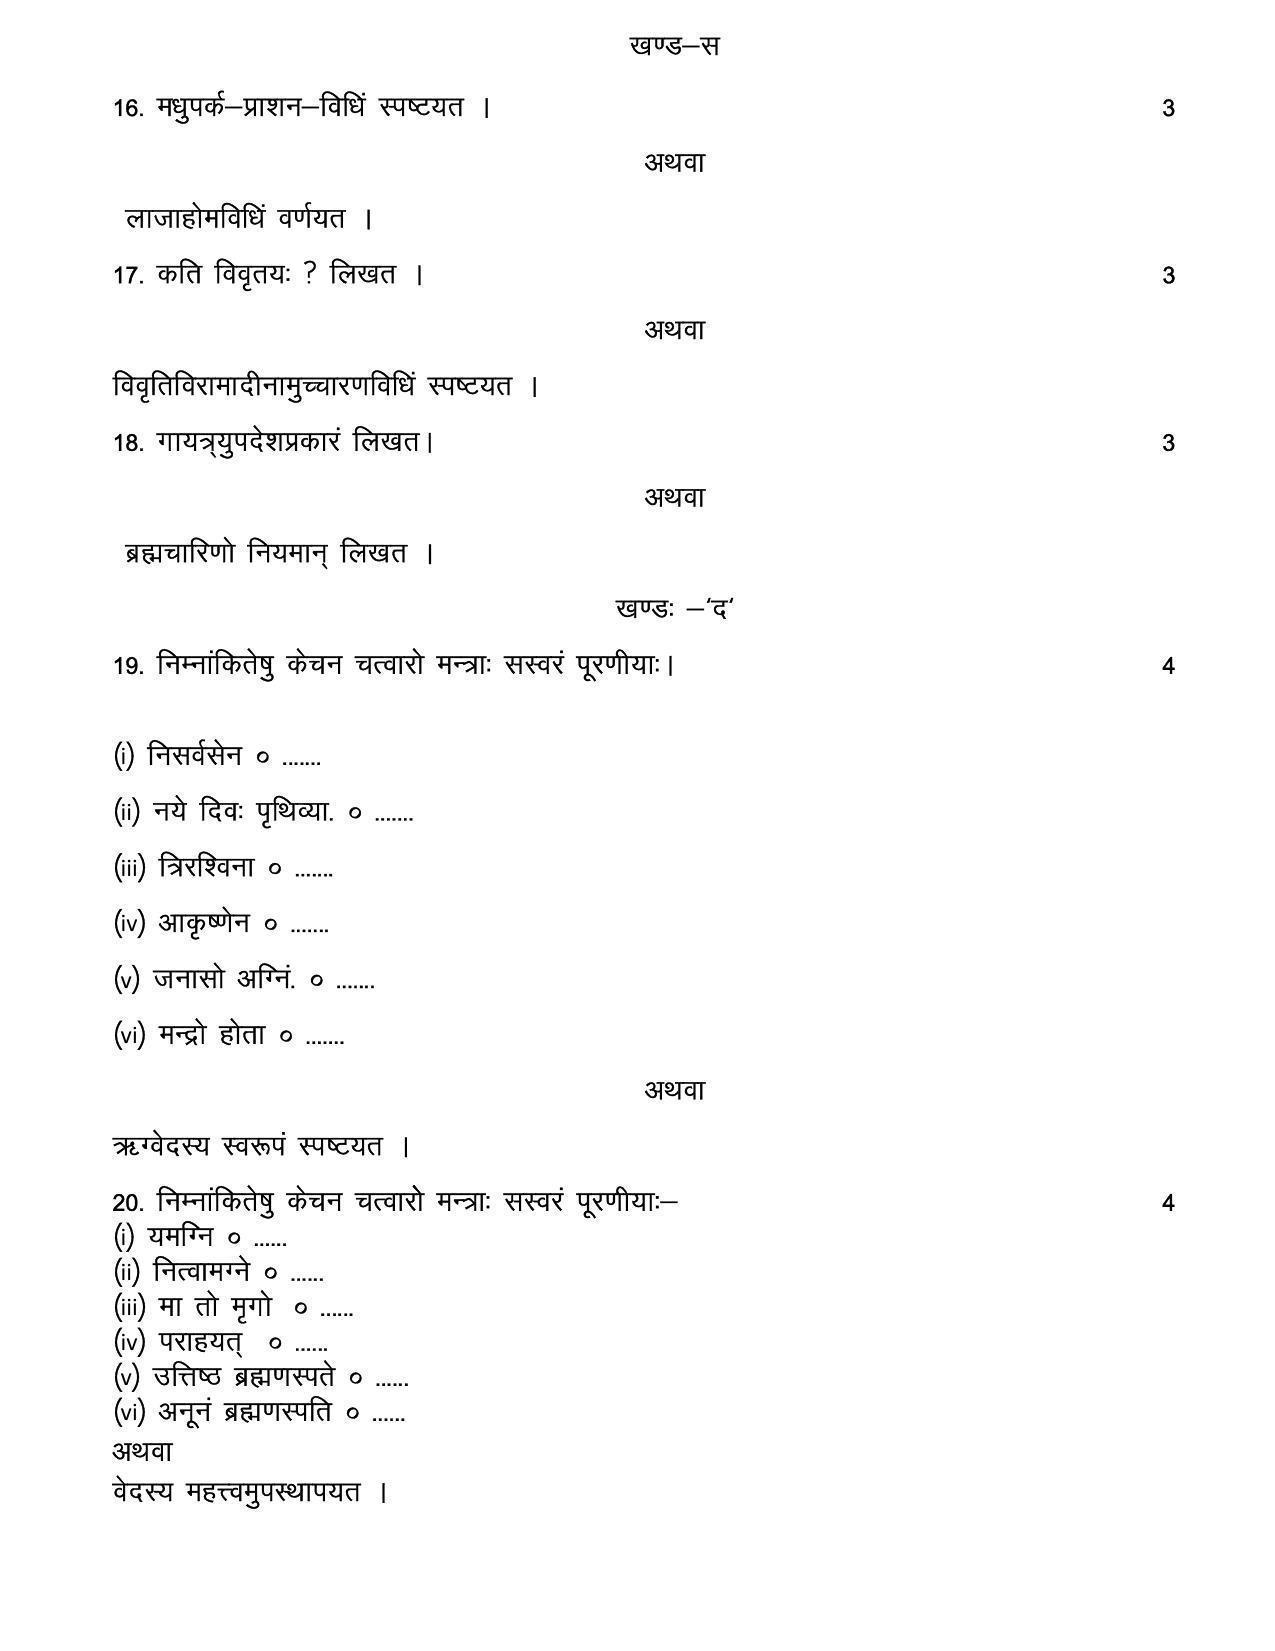 RBSE 2023 CLASS 12 RIGVED Paper - Page 8